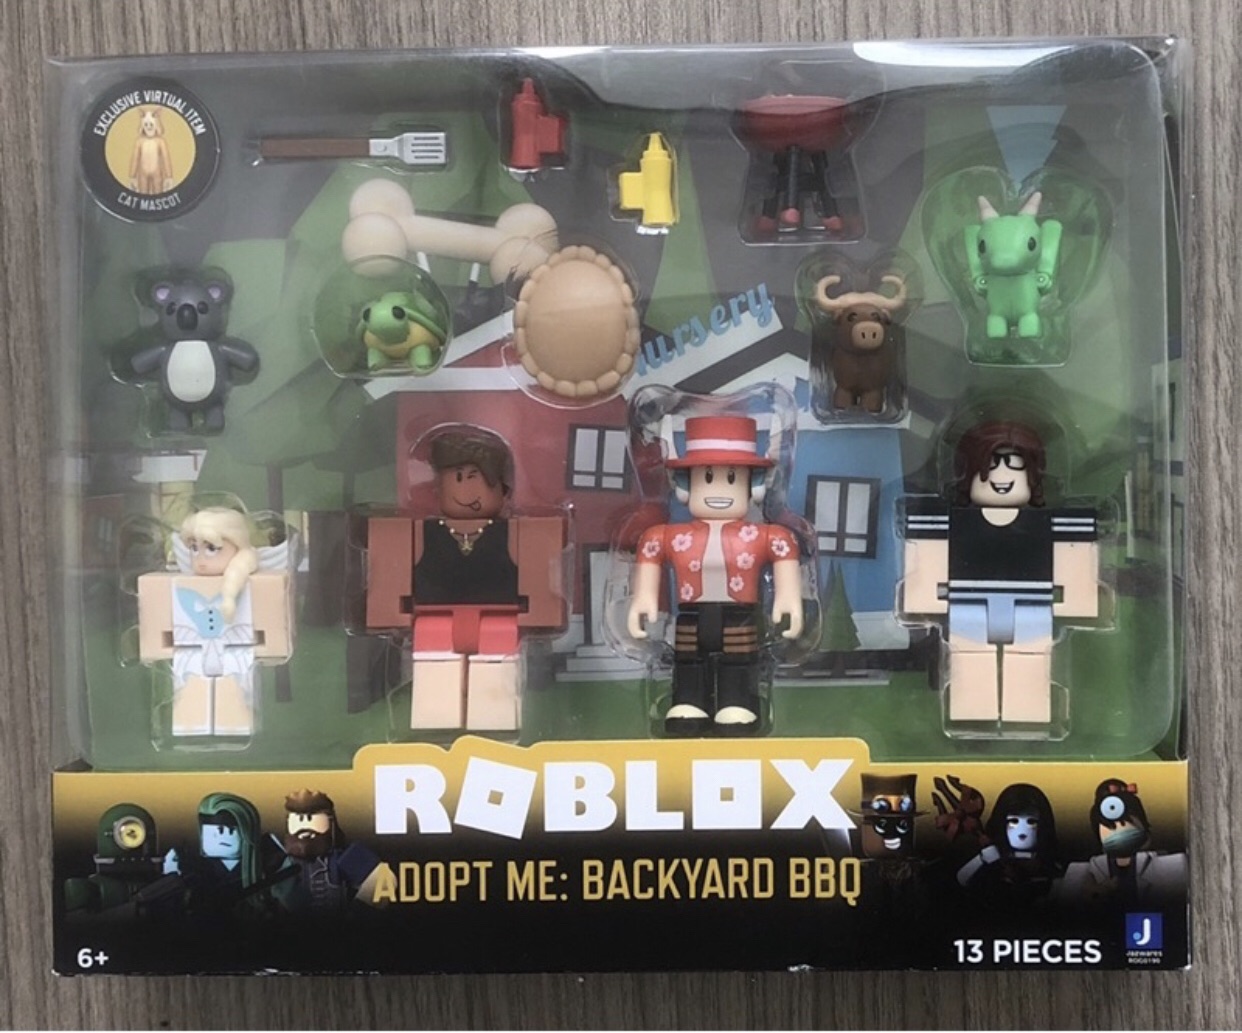 Roblox roblox celebrity collection - adopt me: backyard bbq four figure  pack [includes exclusive virtual item]